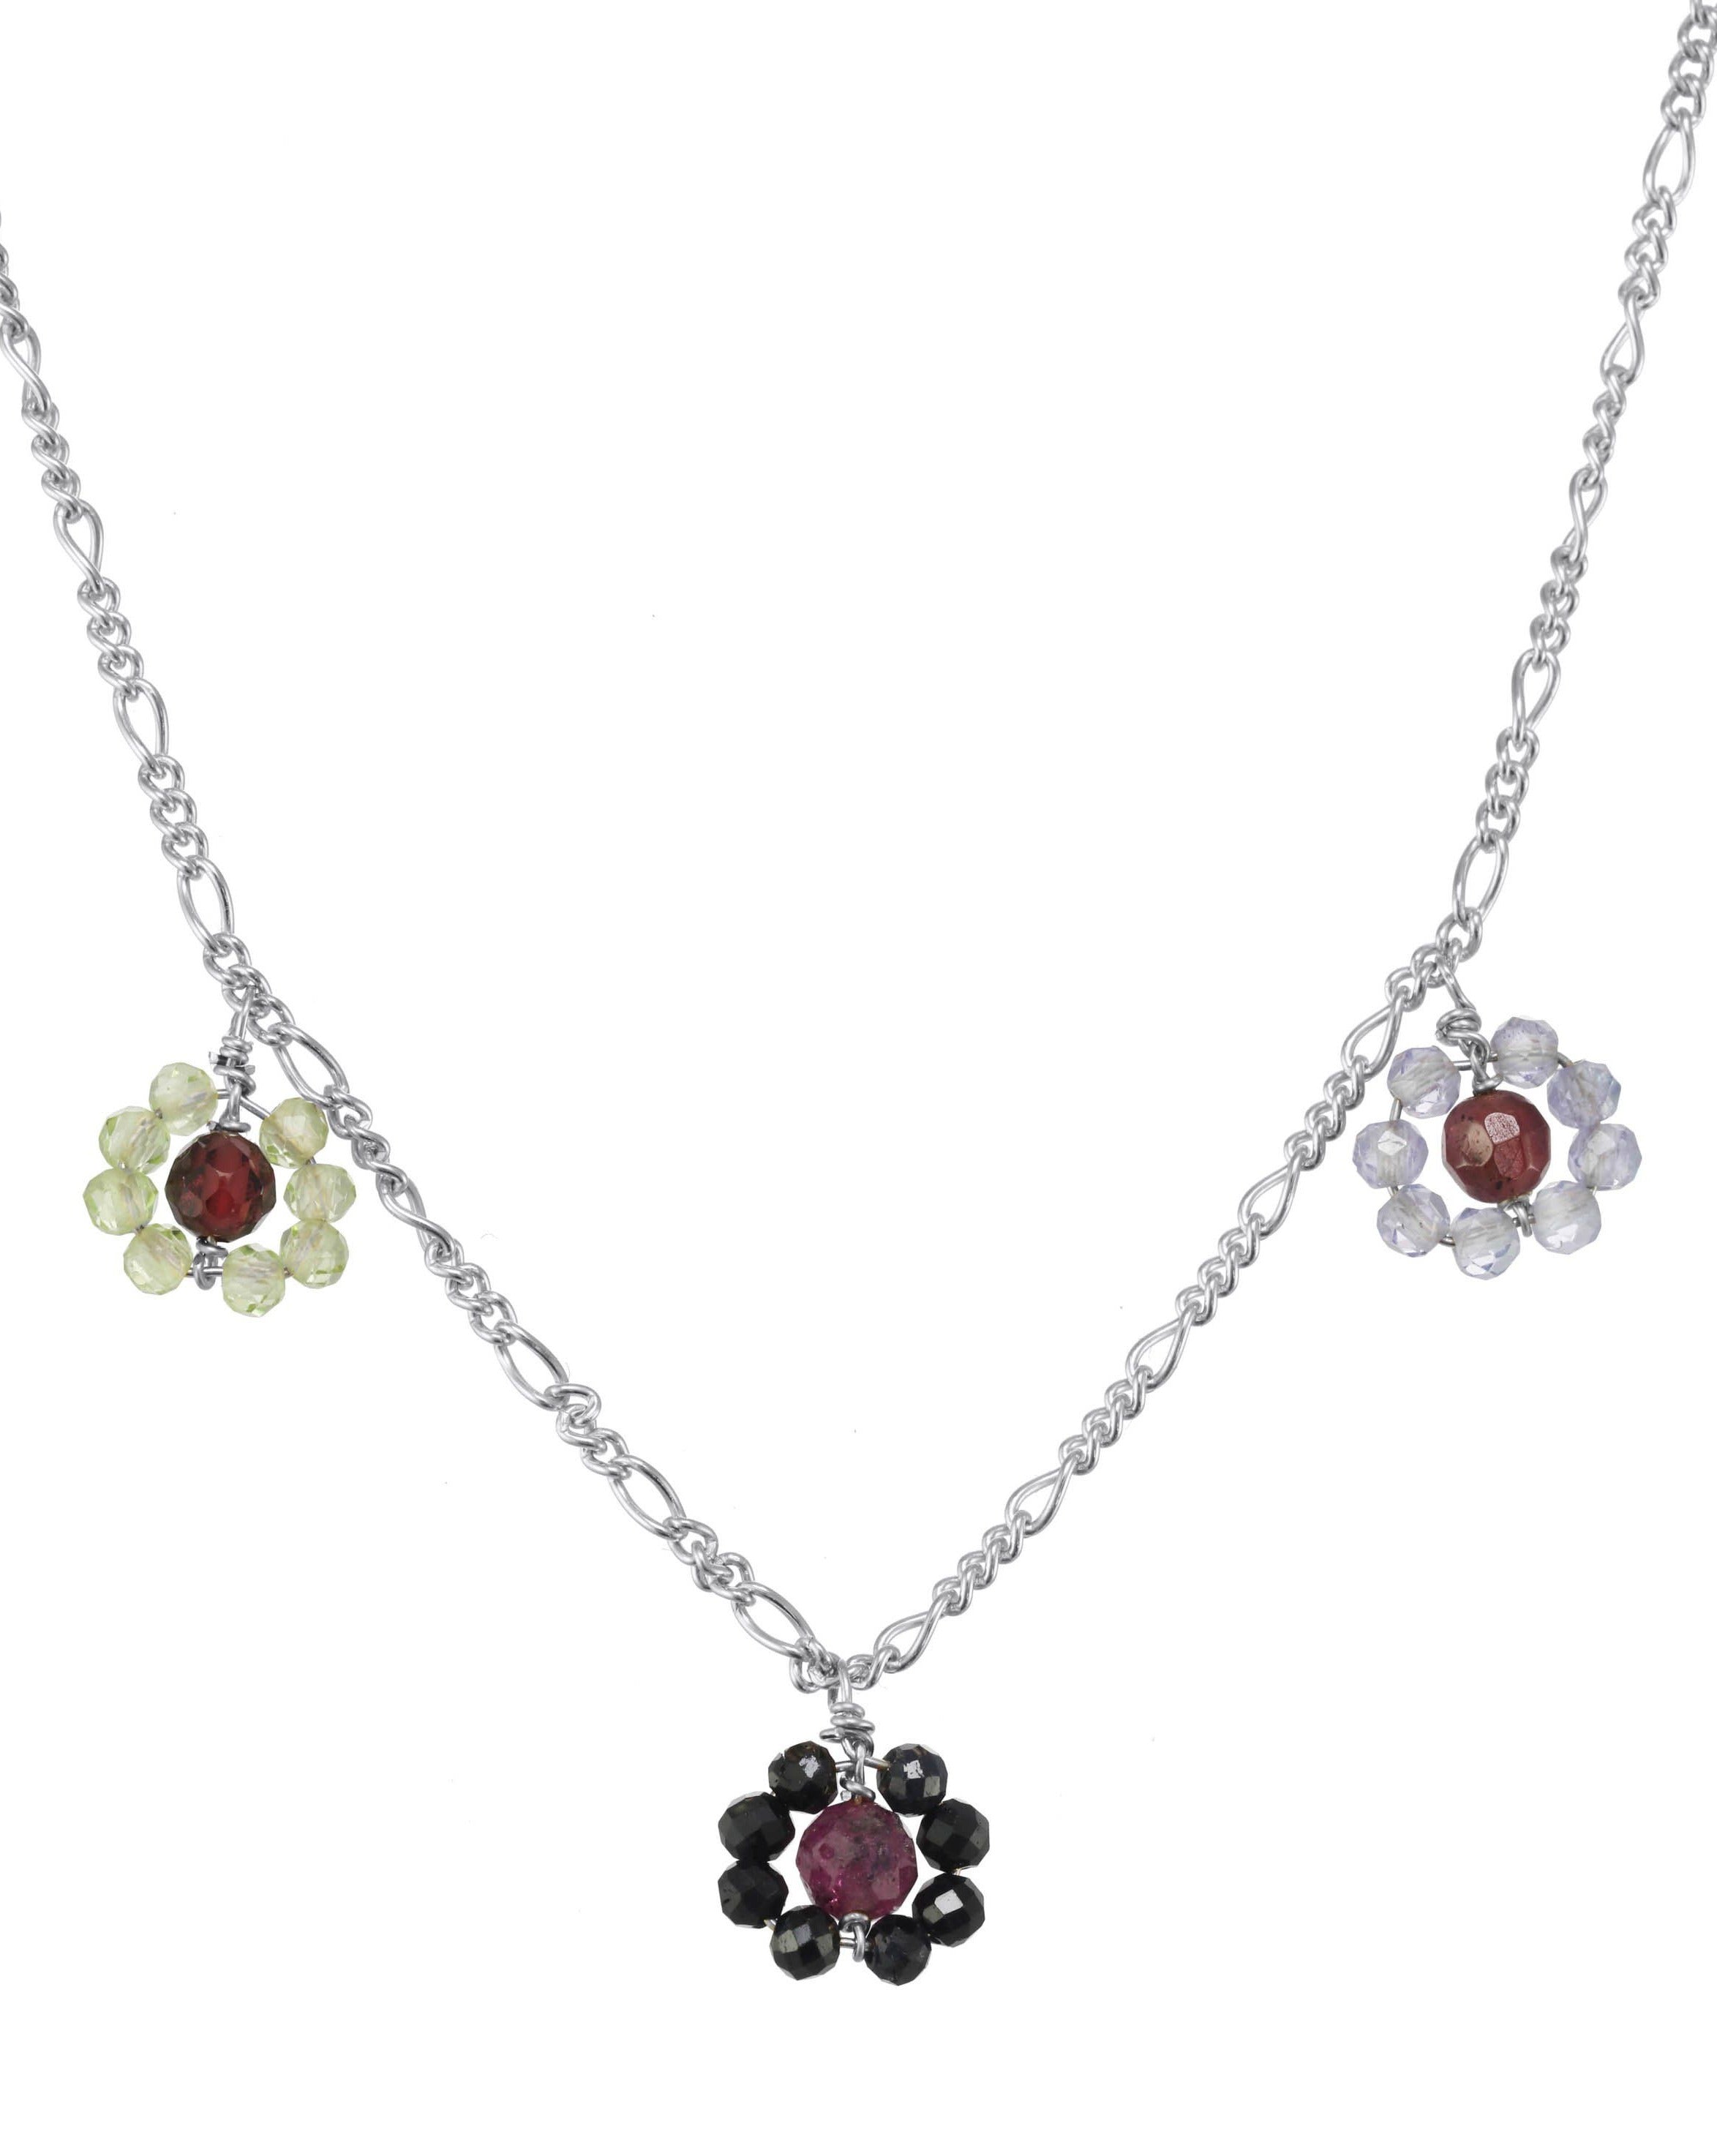 Montanita Necklace by KOZAKH. A 16 to 18 inch adjustable length necklace, crafted in Sterling Silver, featuring 2mm Sapphire, Tanzanite and Peridot and 3mm Ruby and Garnet forming flower charms.